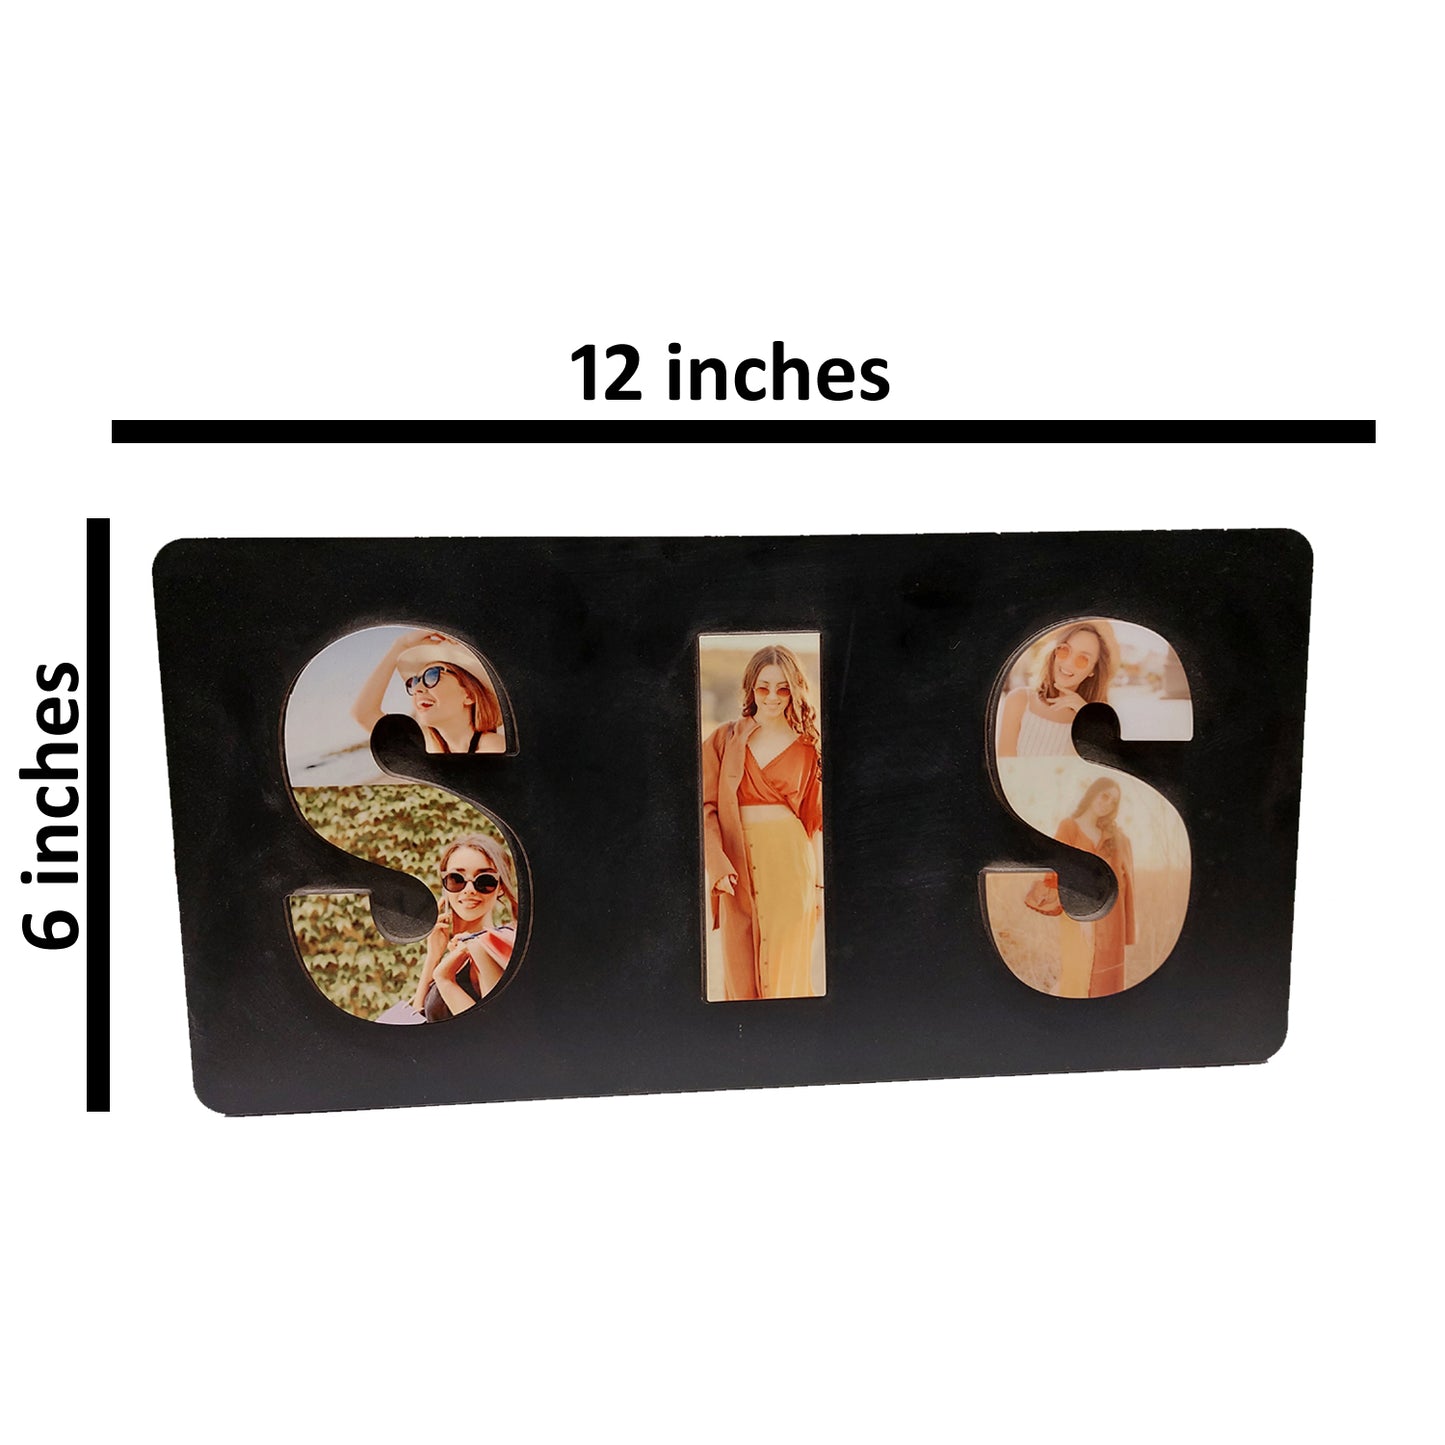 Personalized SIS Frame 6X12 inches | Gifts for sister